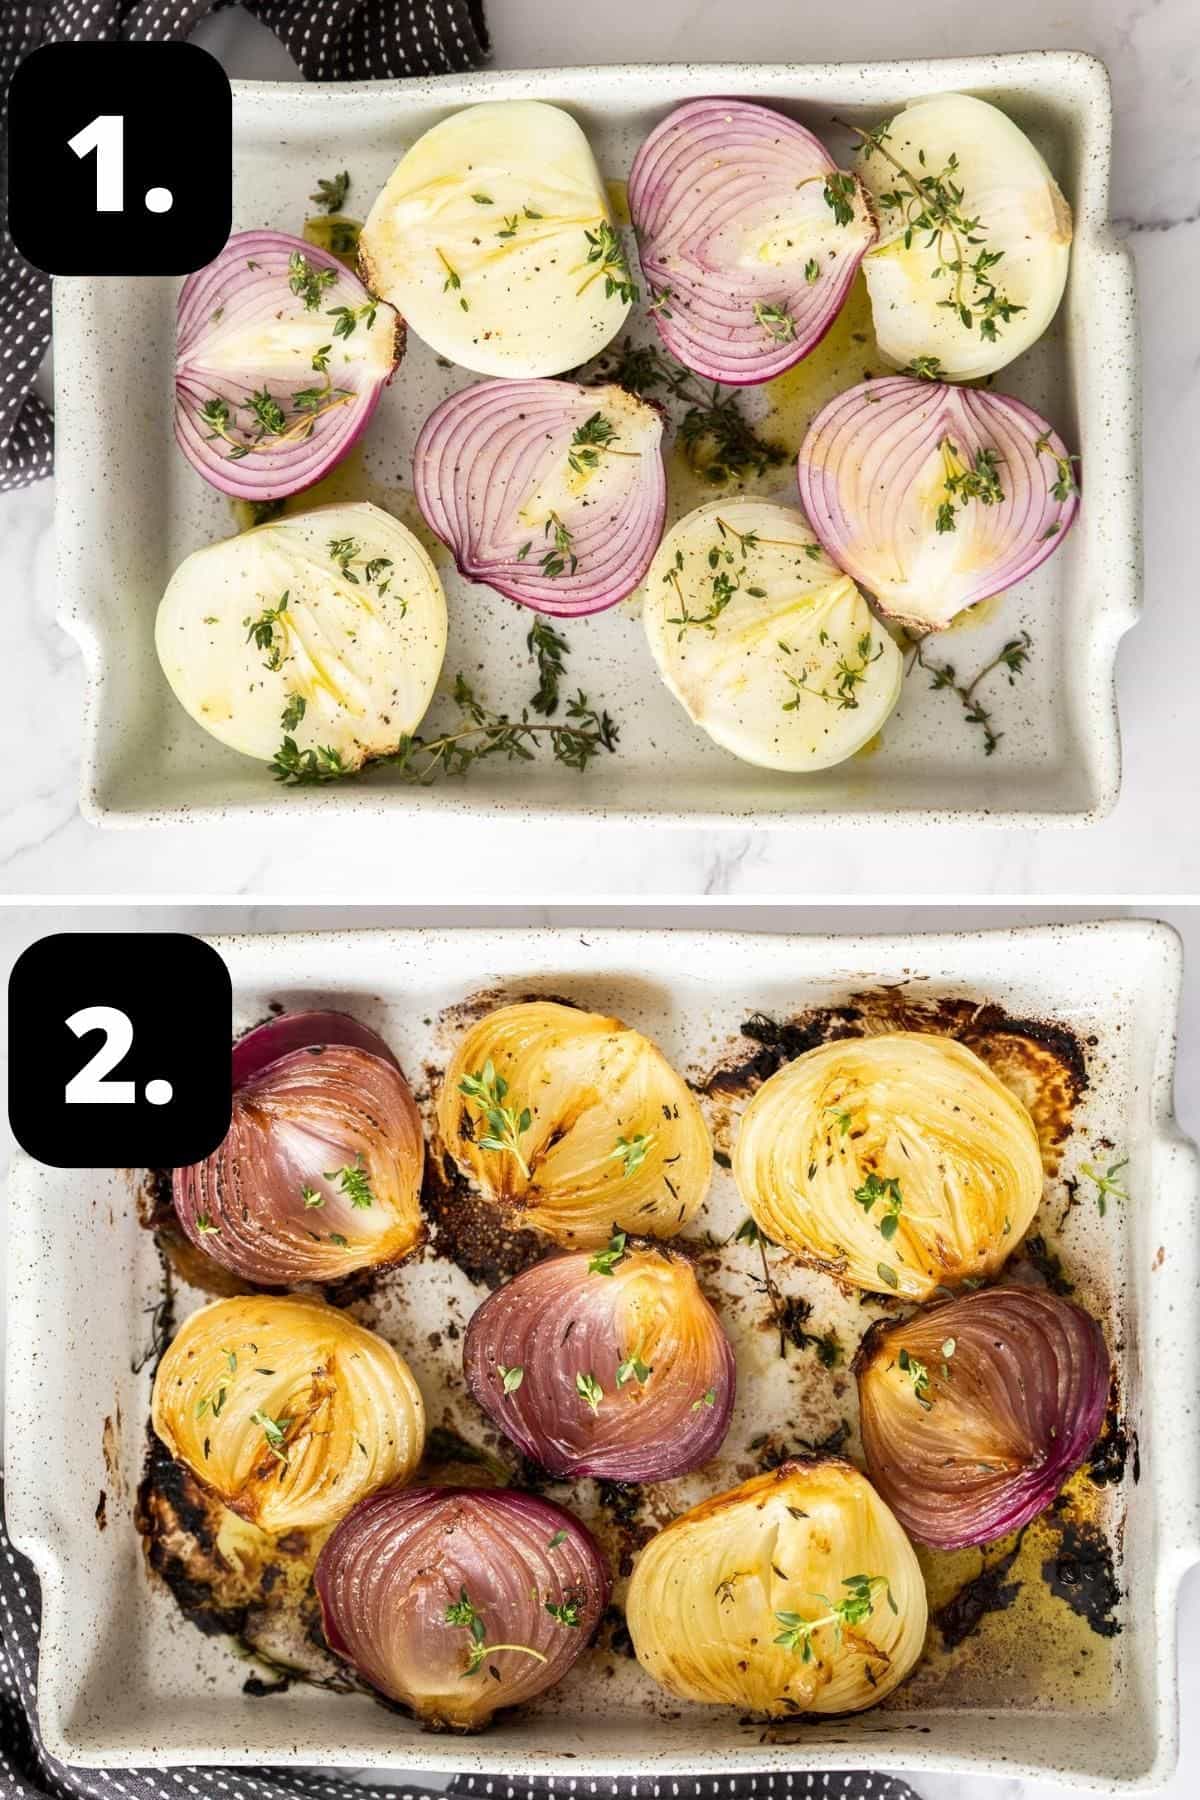 Steps 1-2 of preparing this recipe - the onion halves in a white rectangular baking dish and after they've roasted in the oven.